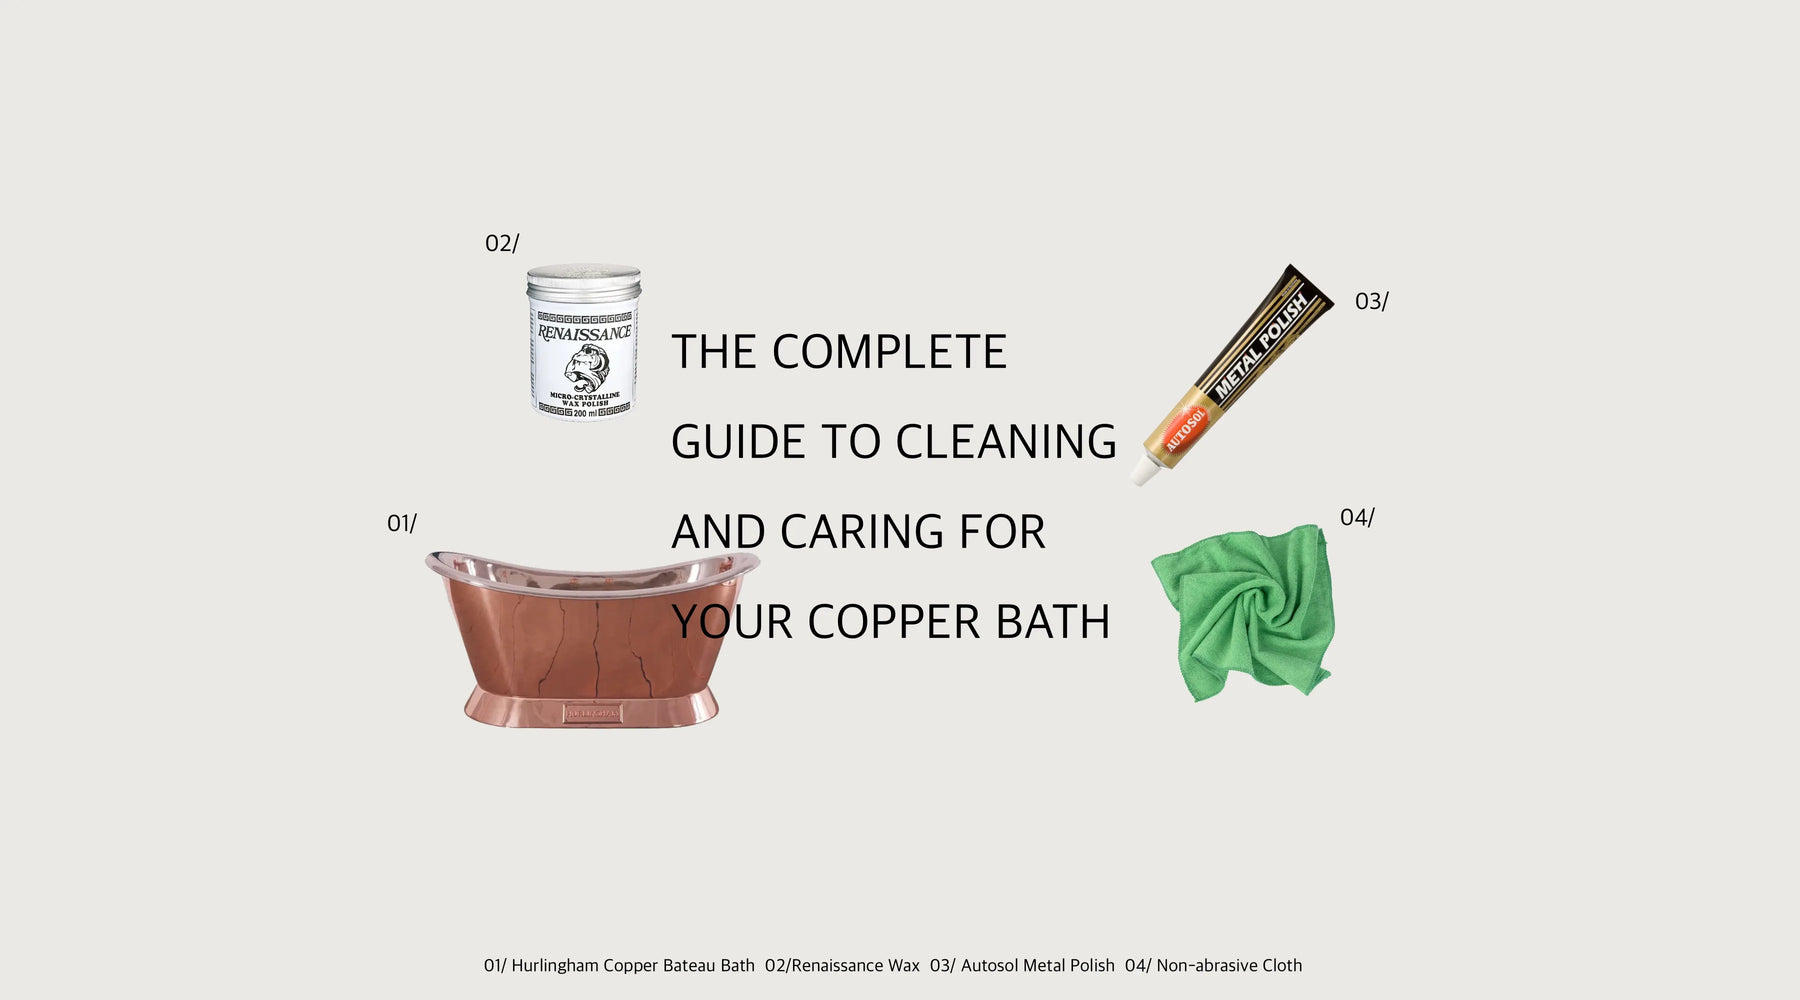 The Complete Guide to Cleaning and Caring for Your Copper Bath